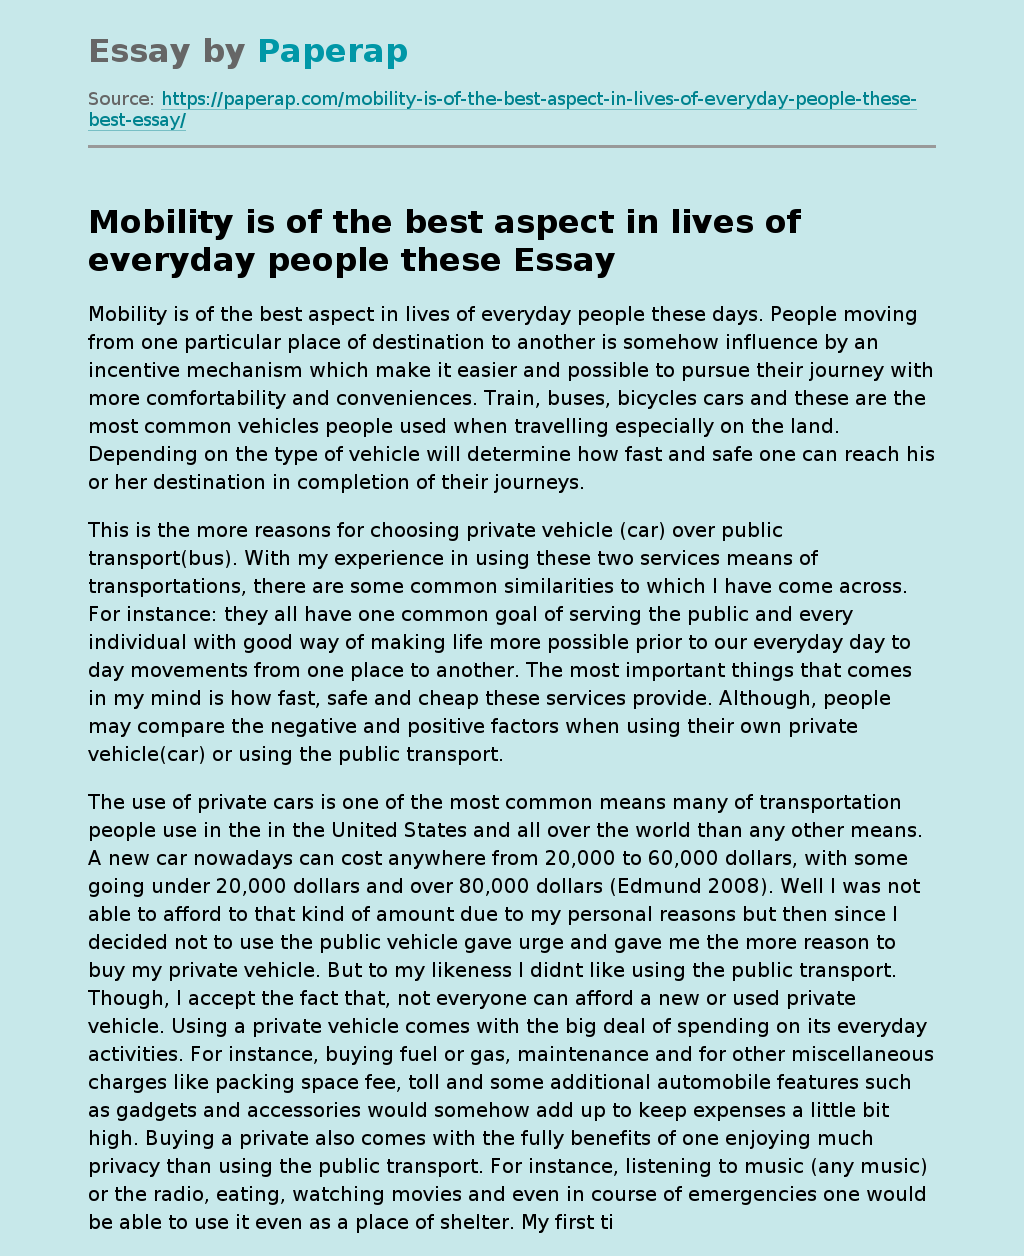 Mobility is of the best aspect in lives of everyday people these